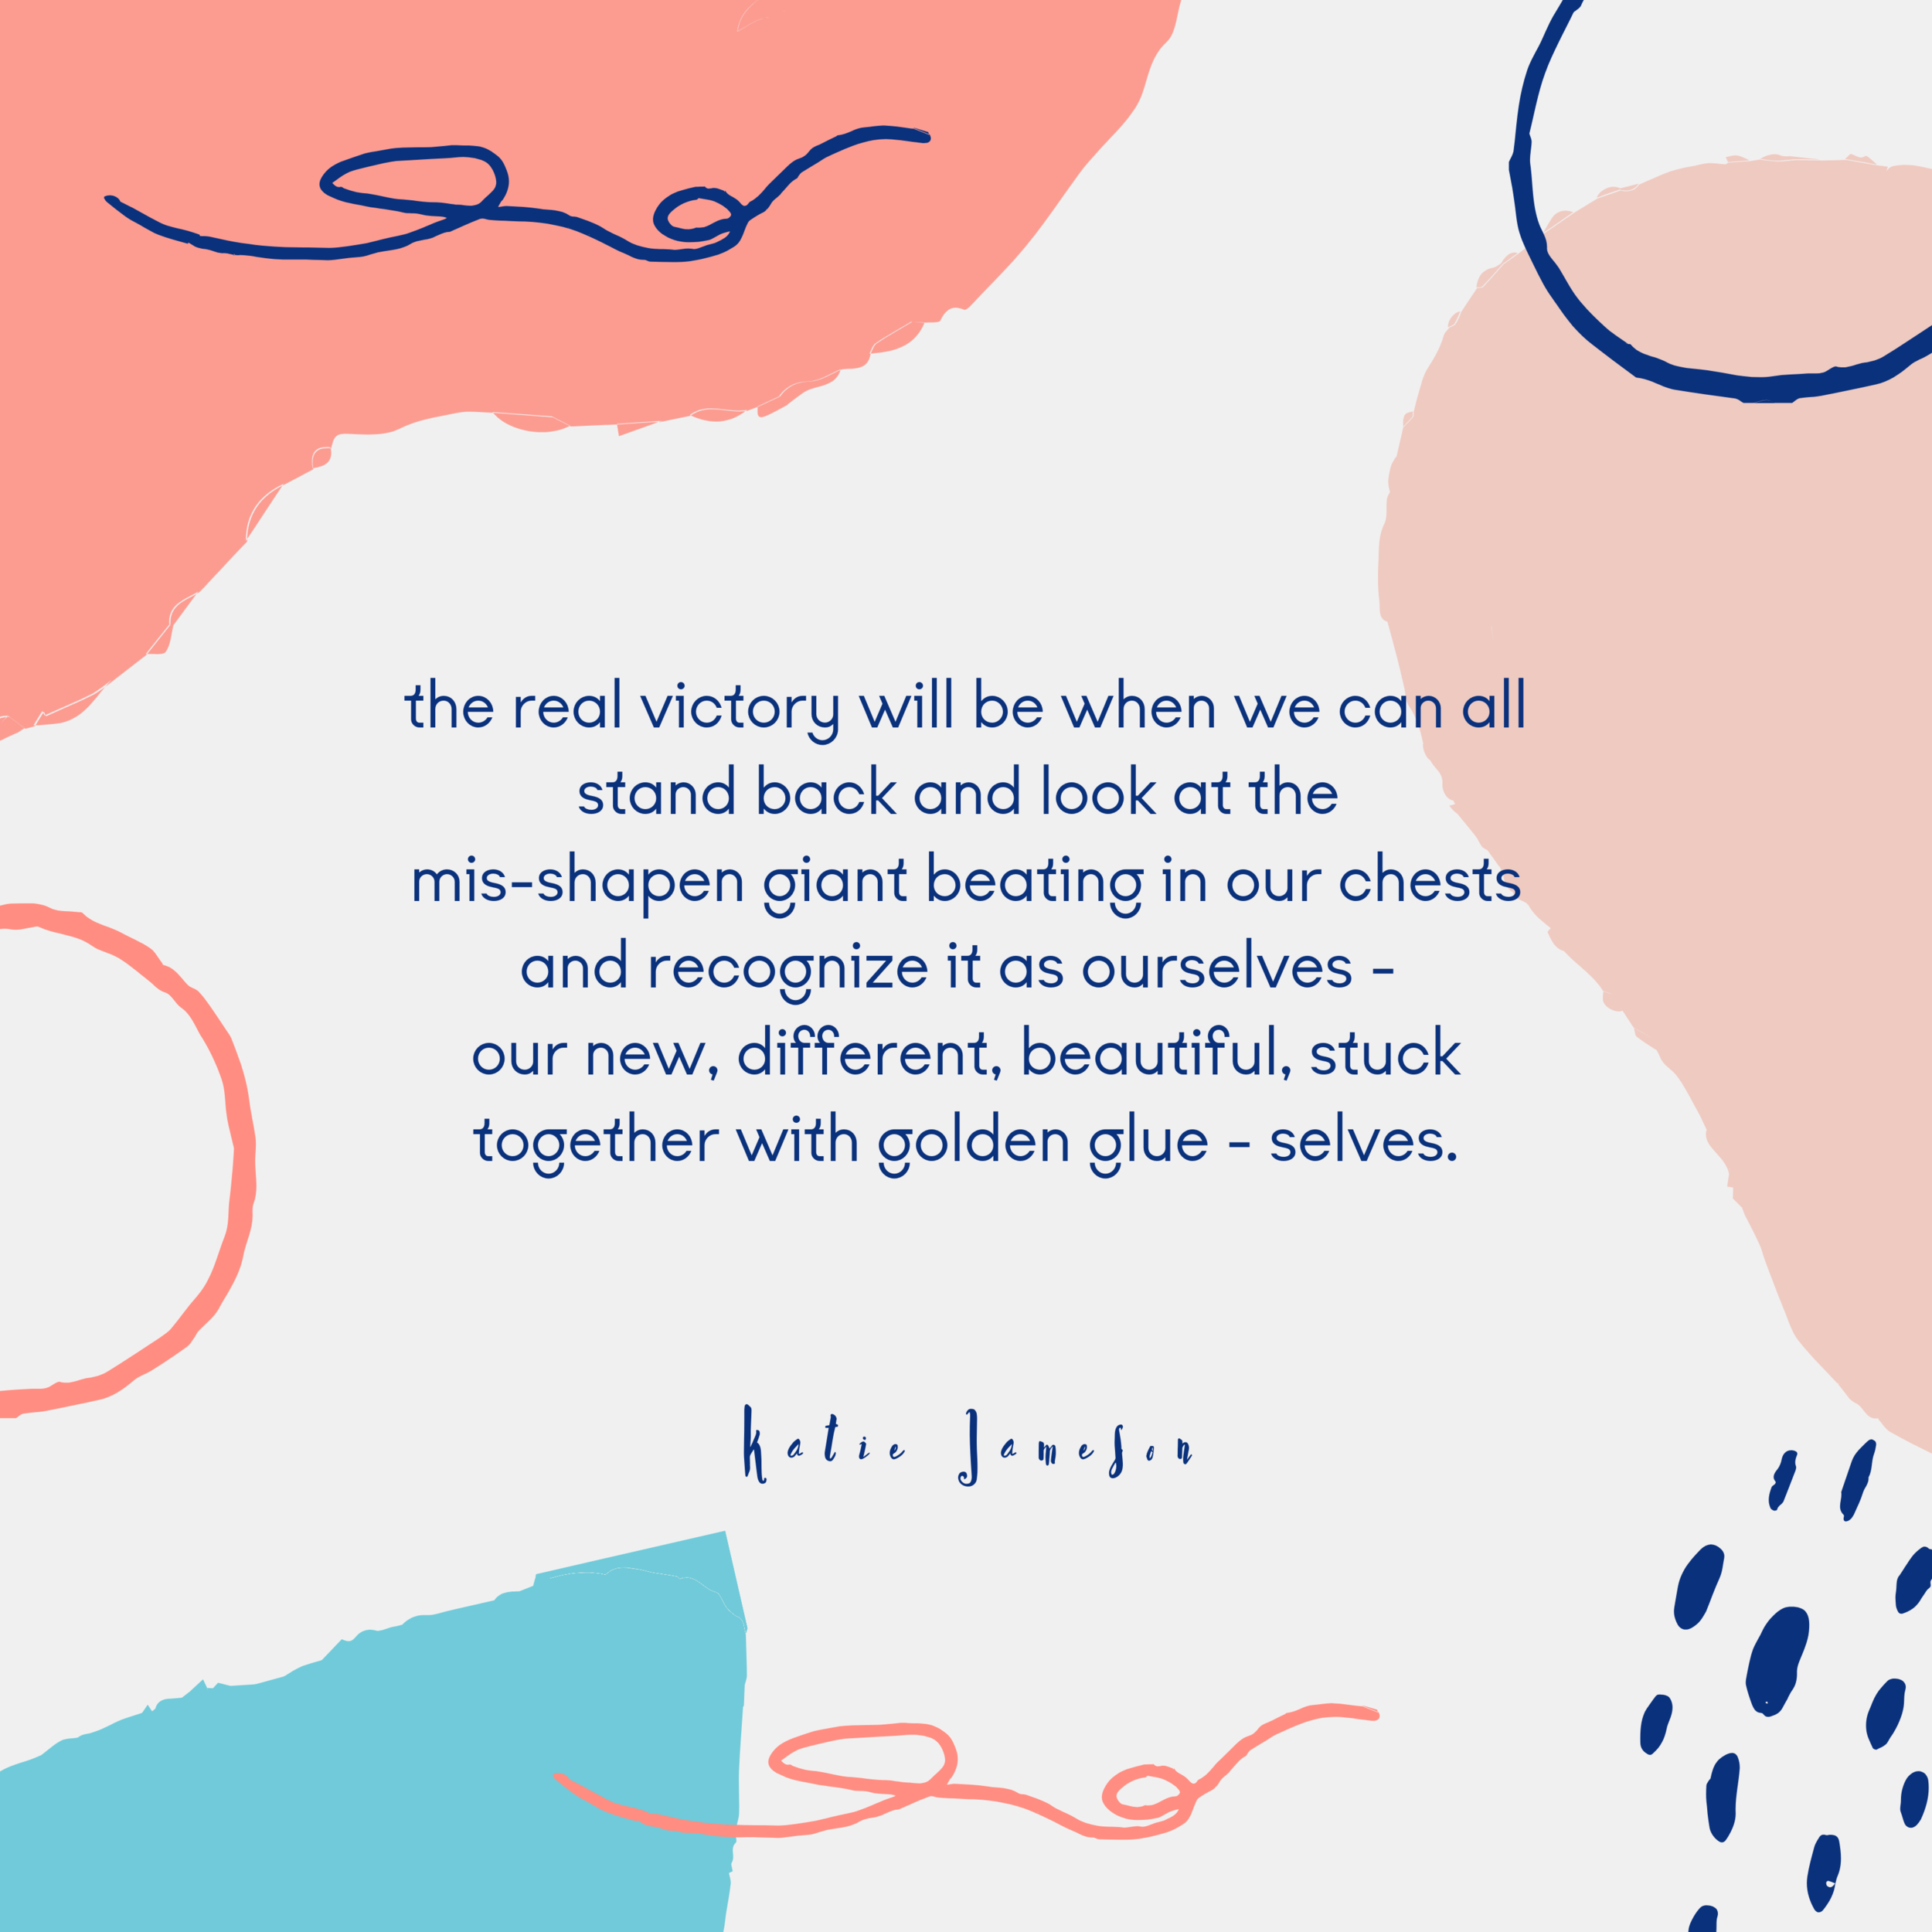 the real victory will be when we can all stand back and look at the misshapen giant beating in our chests and recognize it as ourselves - our new, different, beautiful, stuck together with golden glue, selves..png